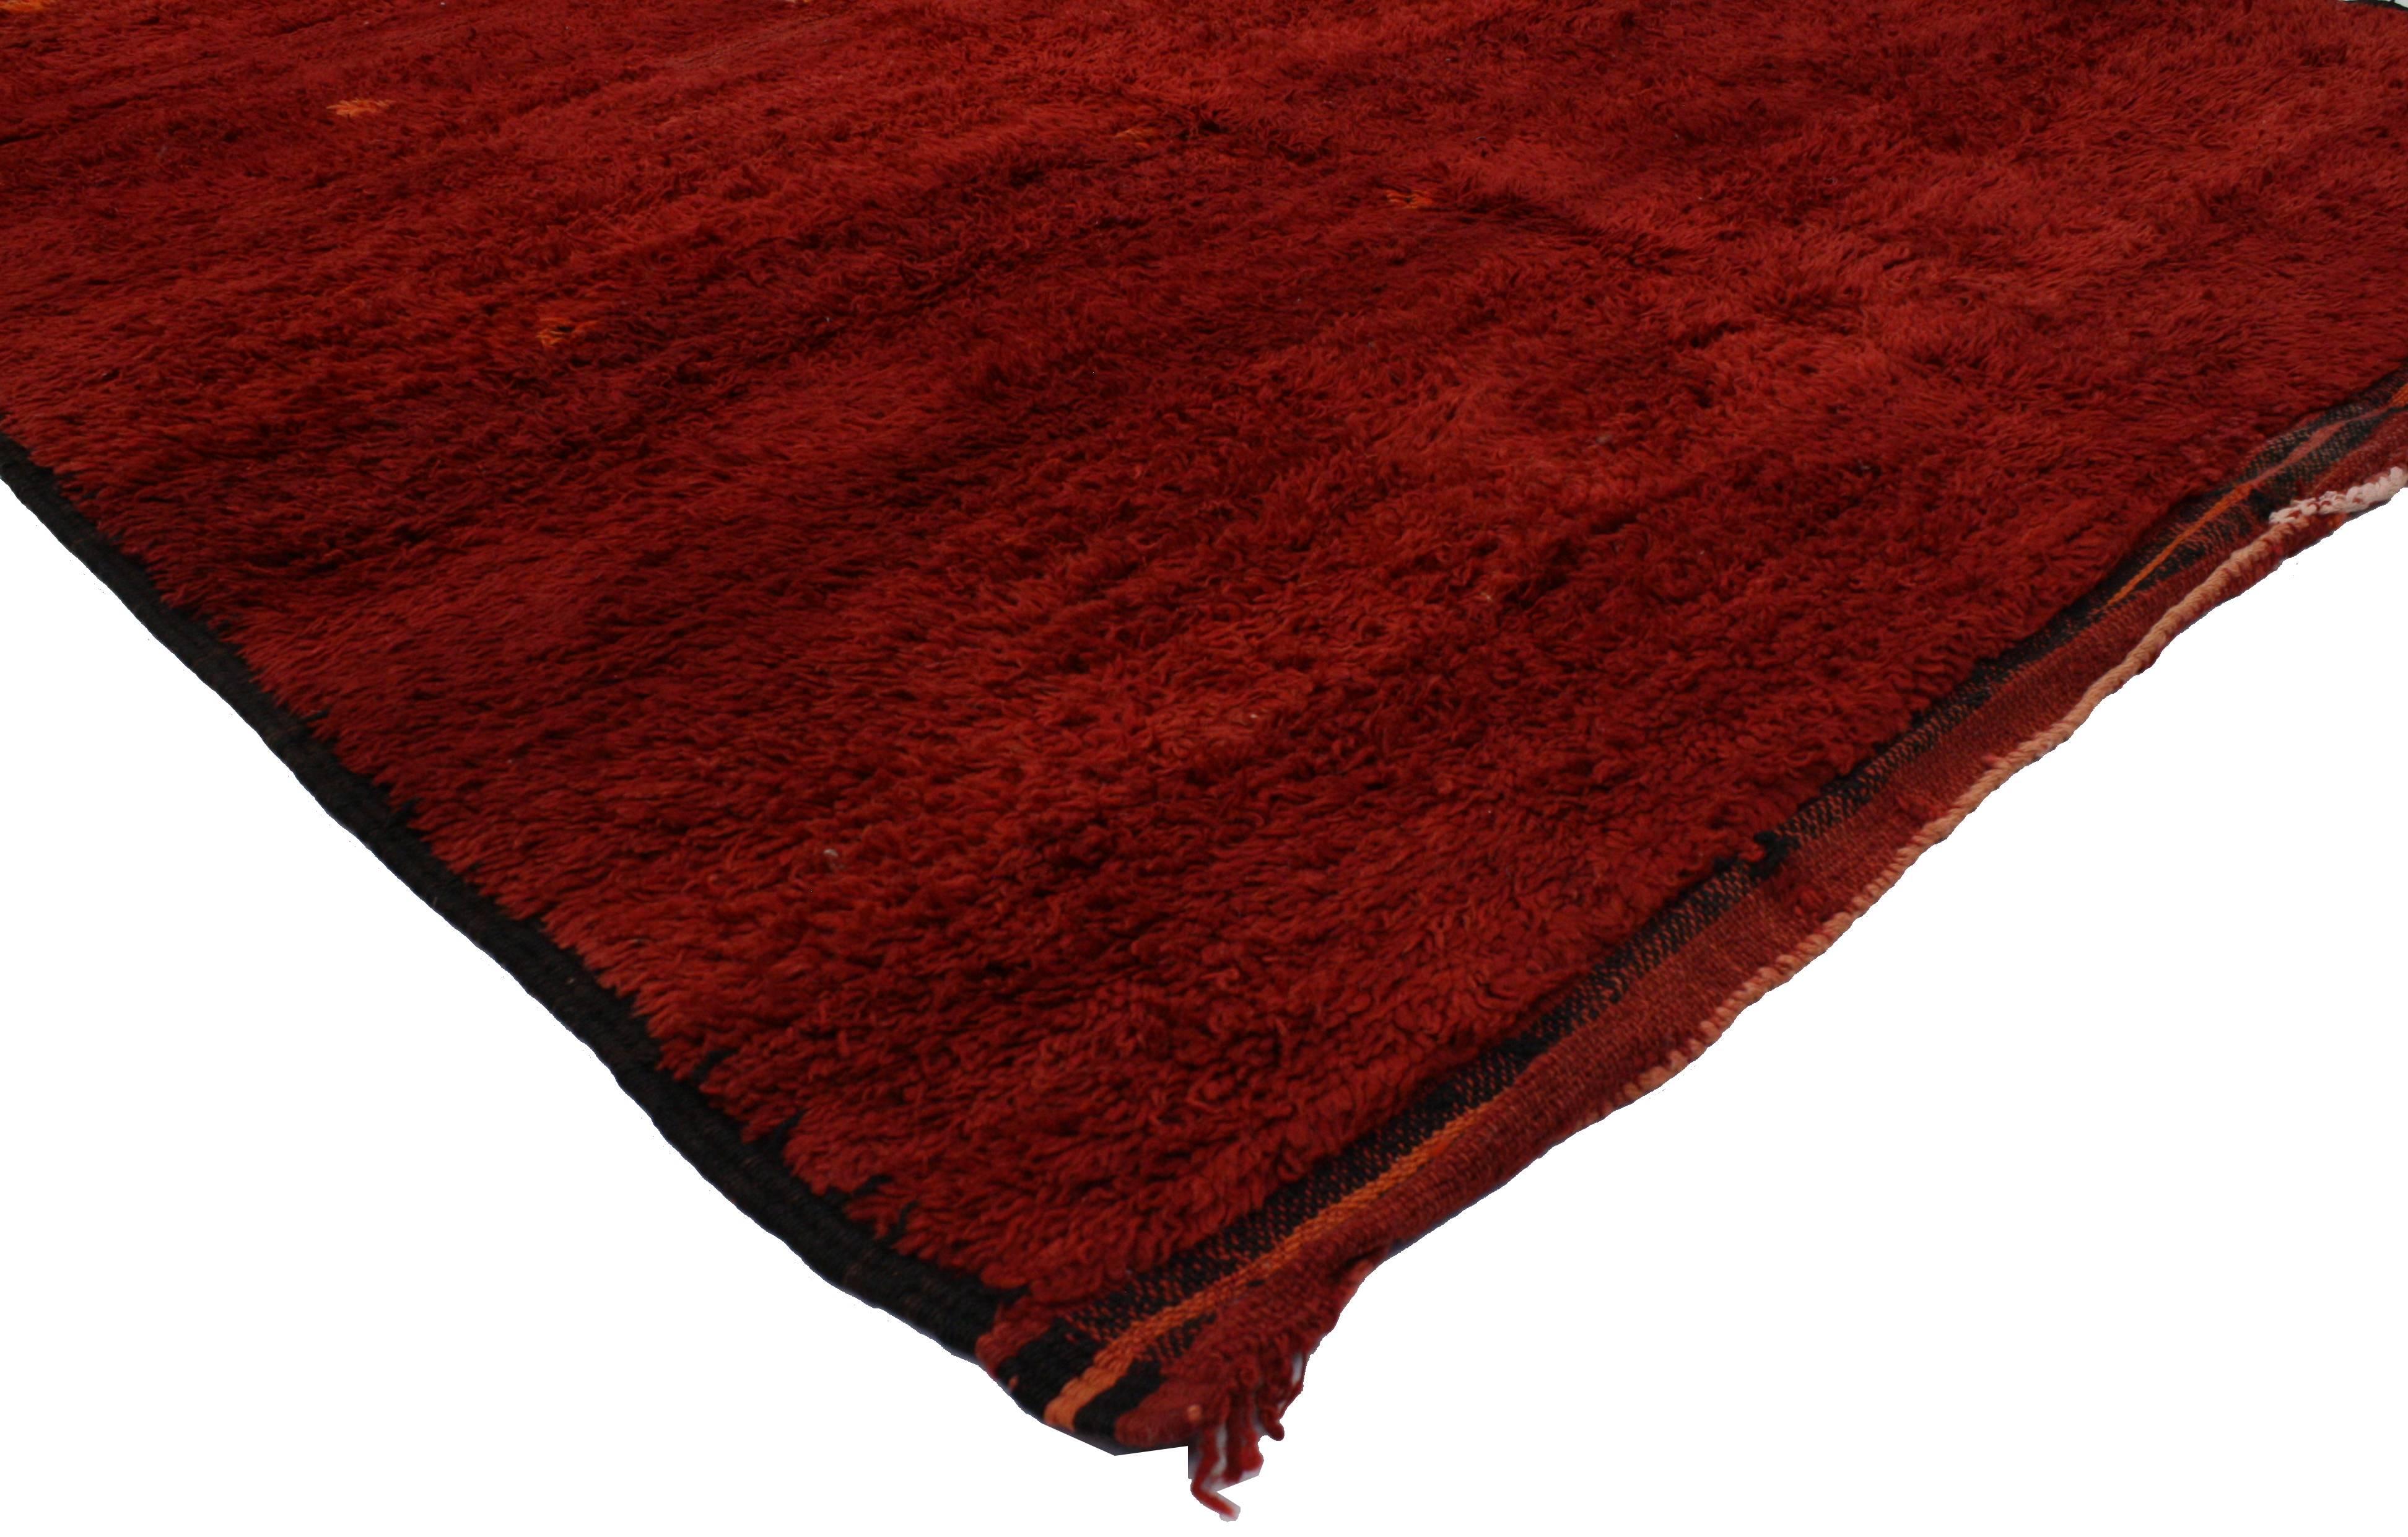 This is an absolutely stunning and impeccably made Moroccan carpet. With its show-stopping red color and luxurious blend of modernism and Berber history, this Moroccan beauty will work well with both Mid-Century Modern and transitional interiors.